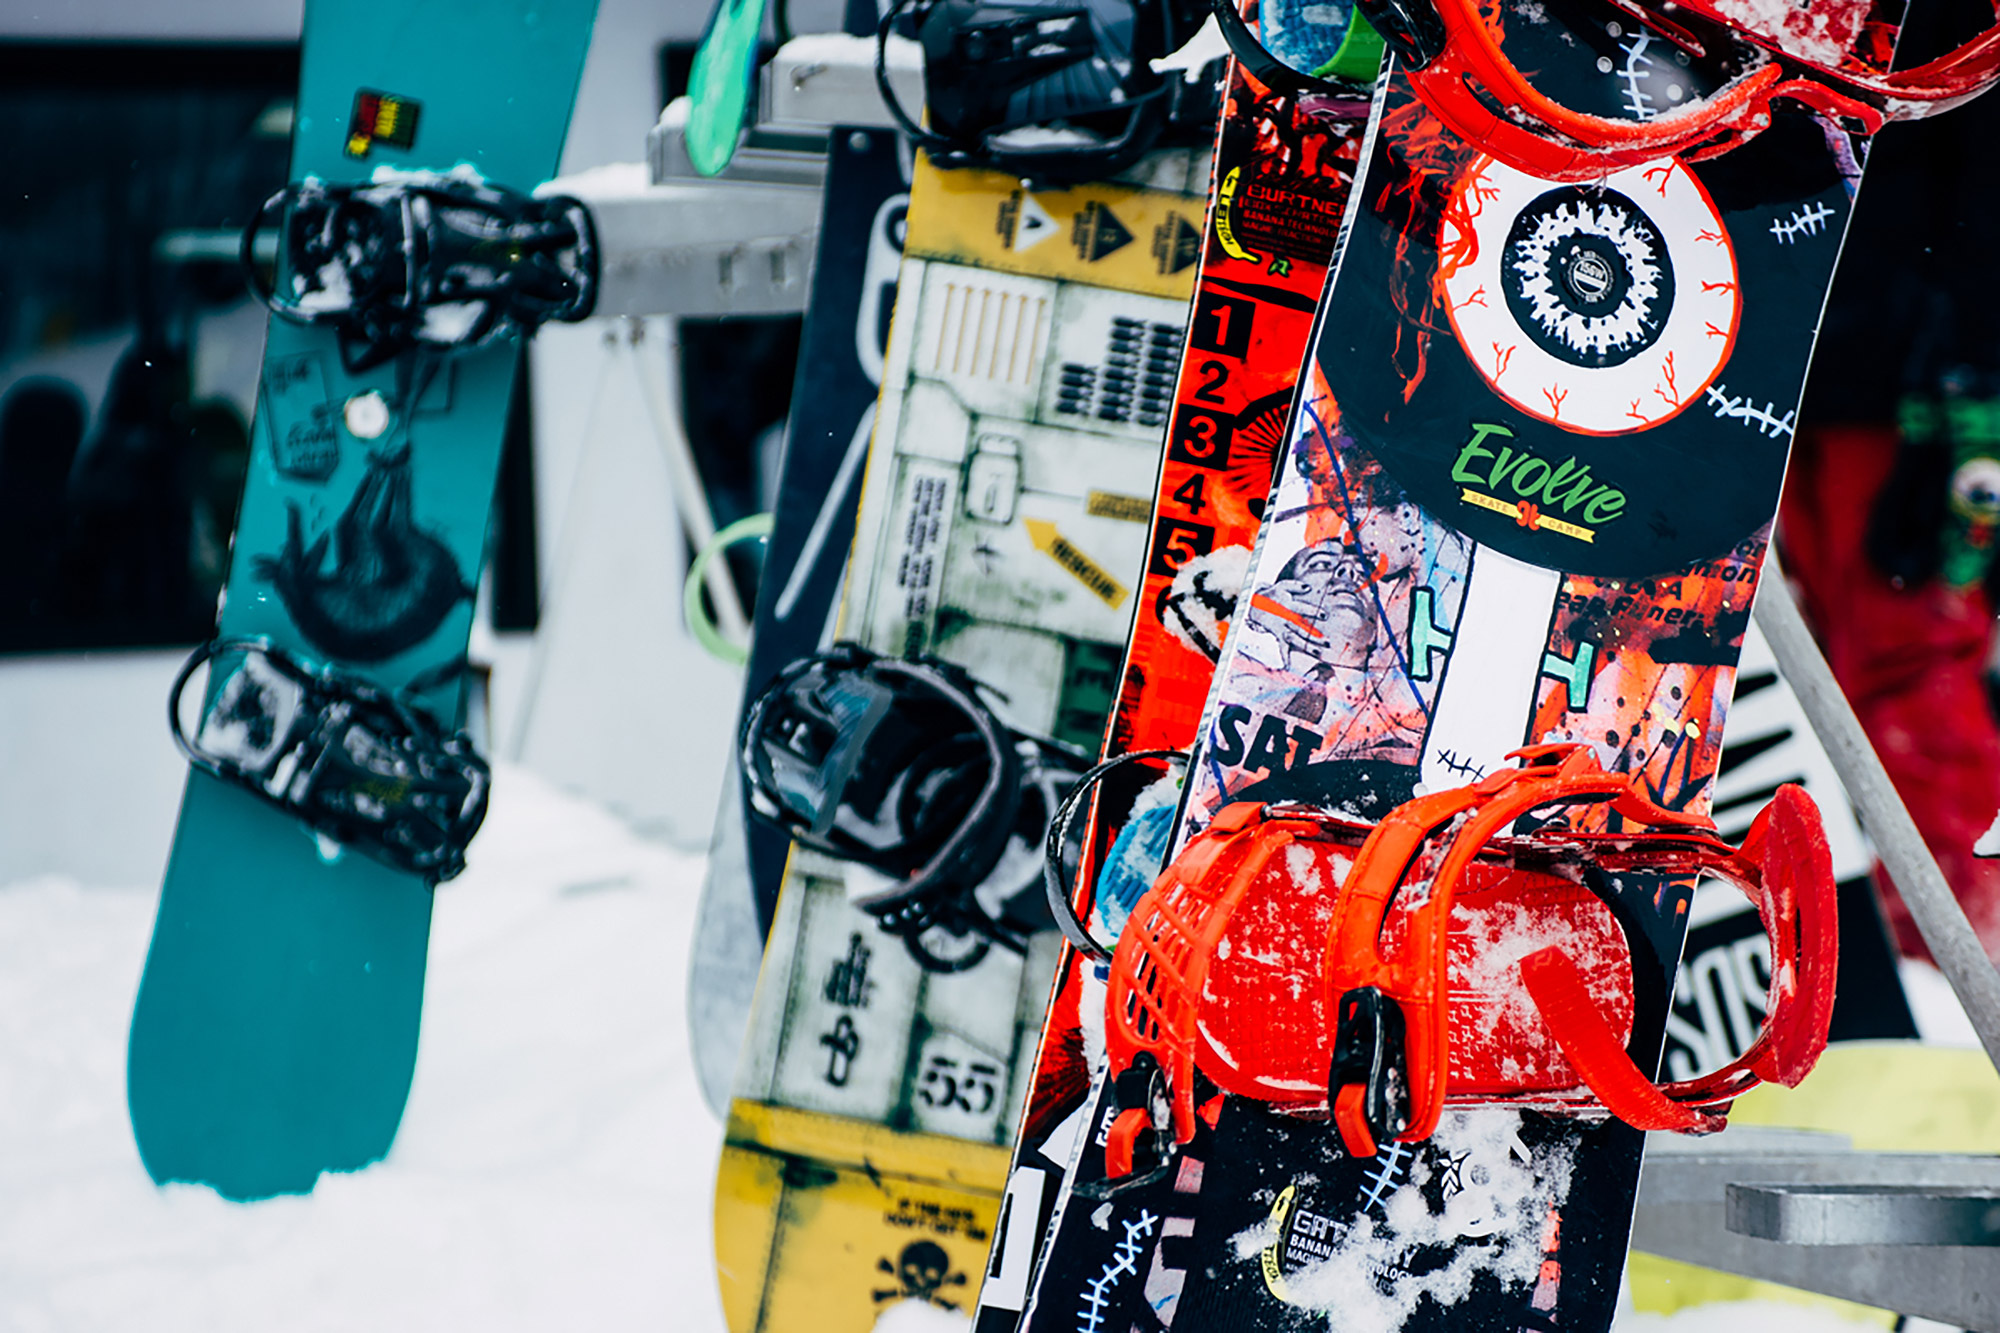 How To Tackle Steep Terrain on a Snowboard